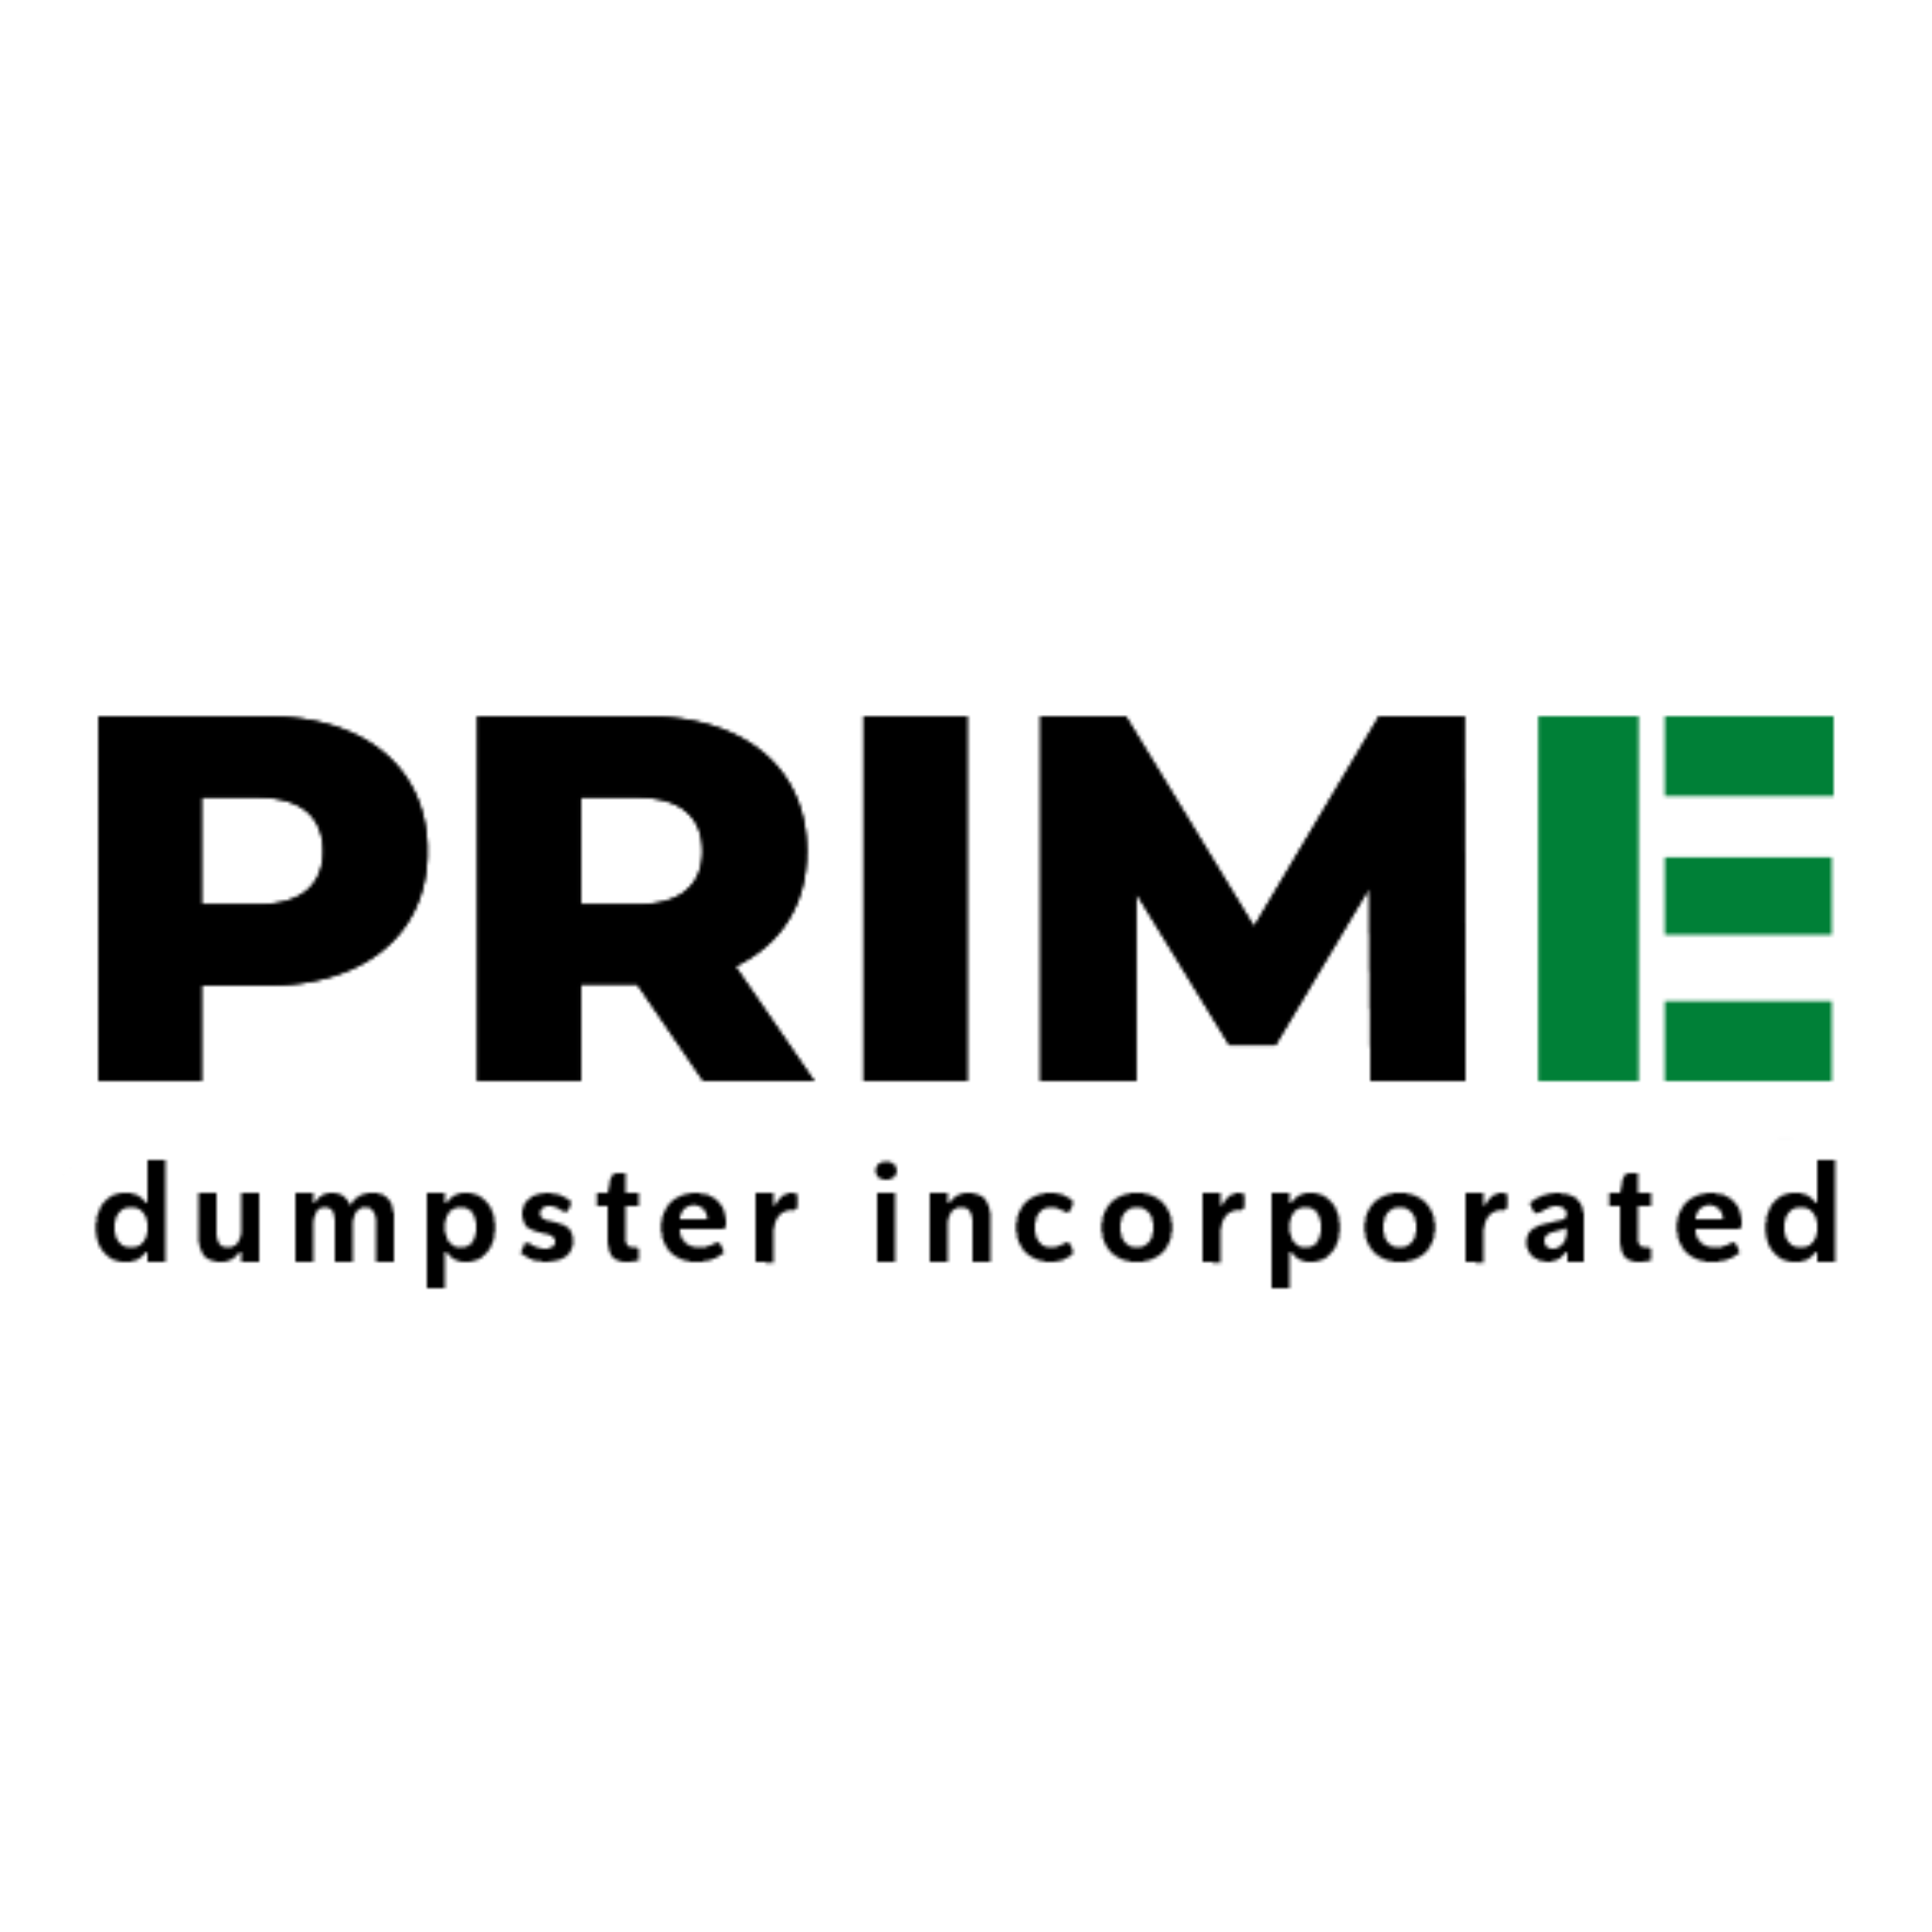 Prime Dumpster Champions Local Community Events with Tailored Waste Management Services